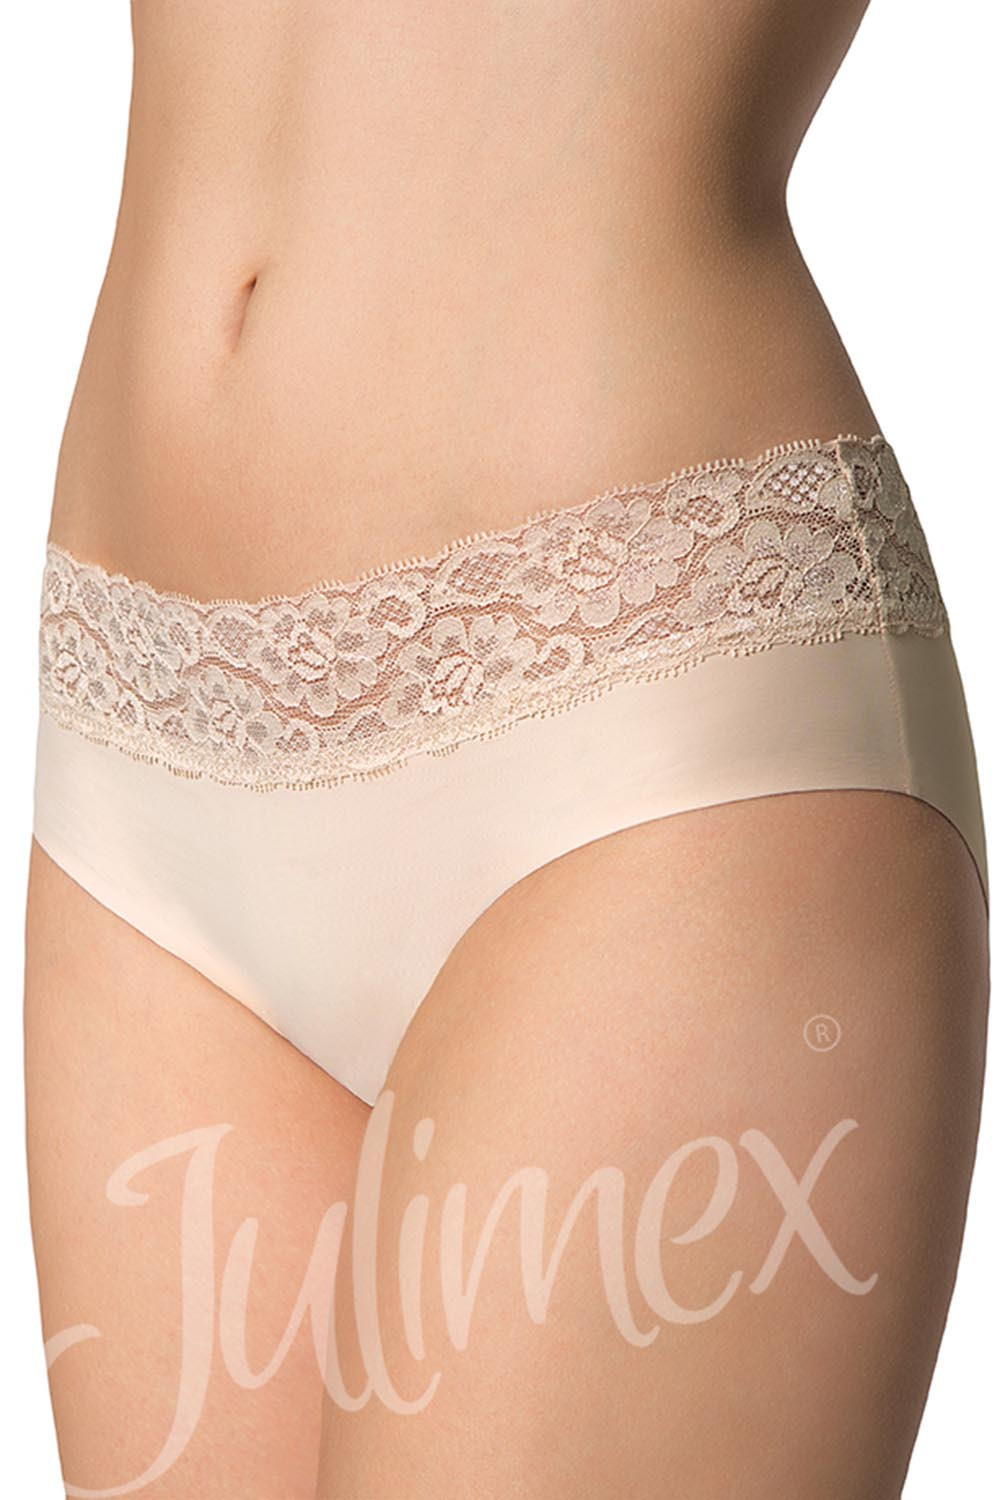 Julimex Hipster panty kolor:beżowy S